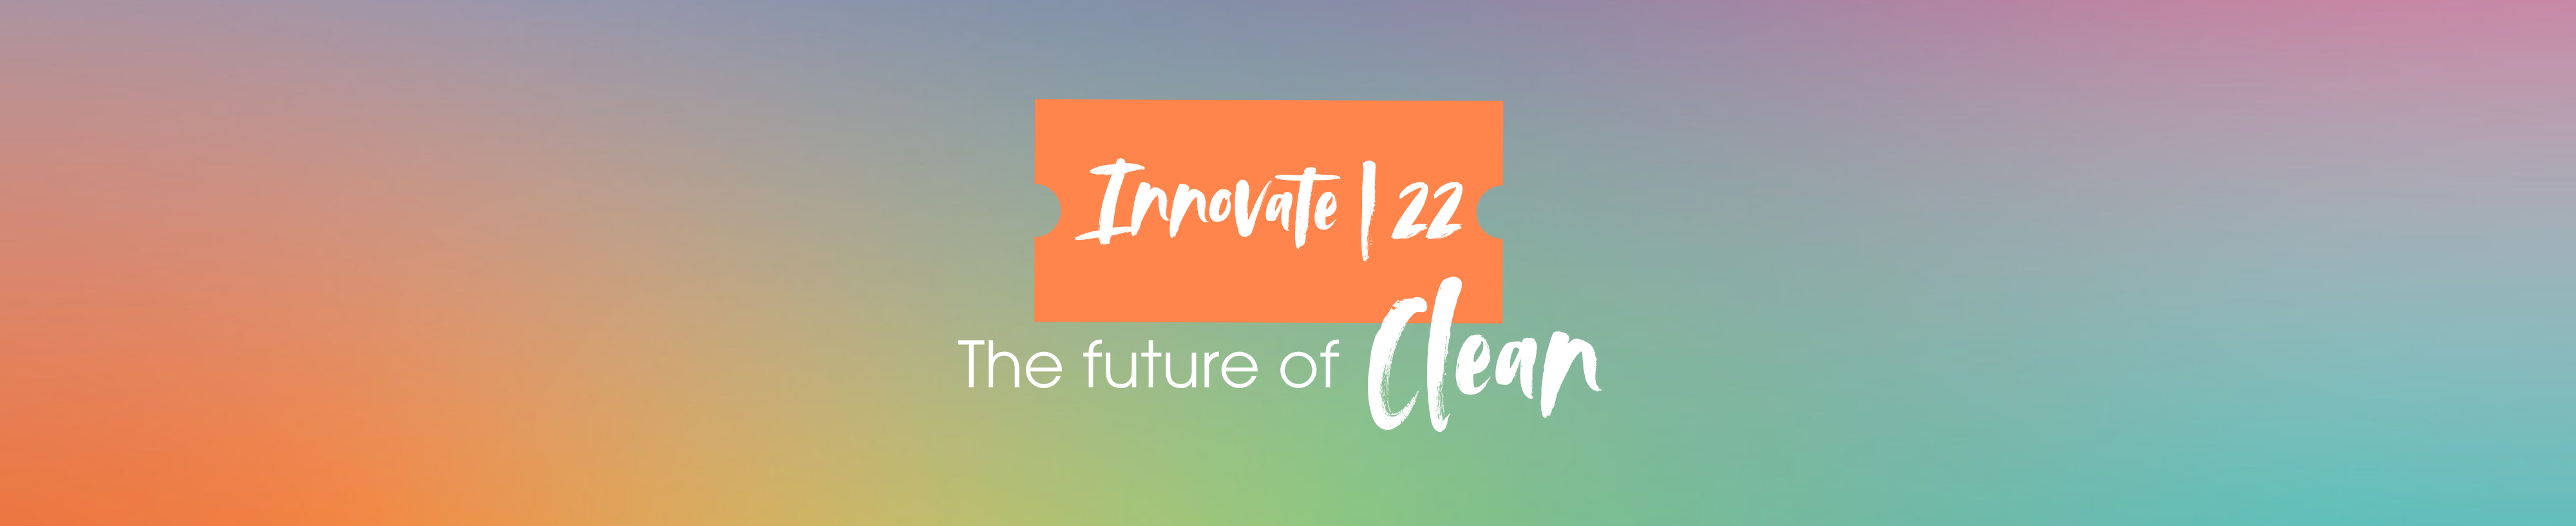 banner with the text "Innovate 22, The future of clean"